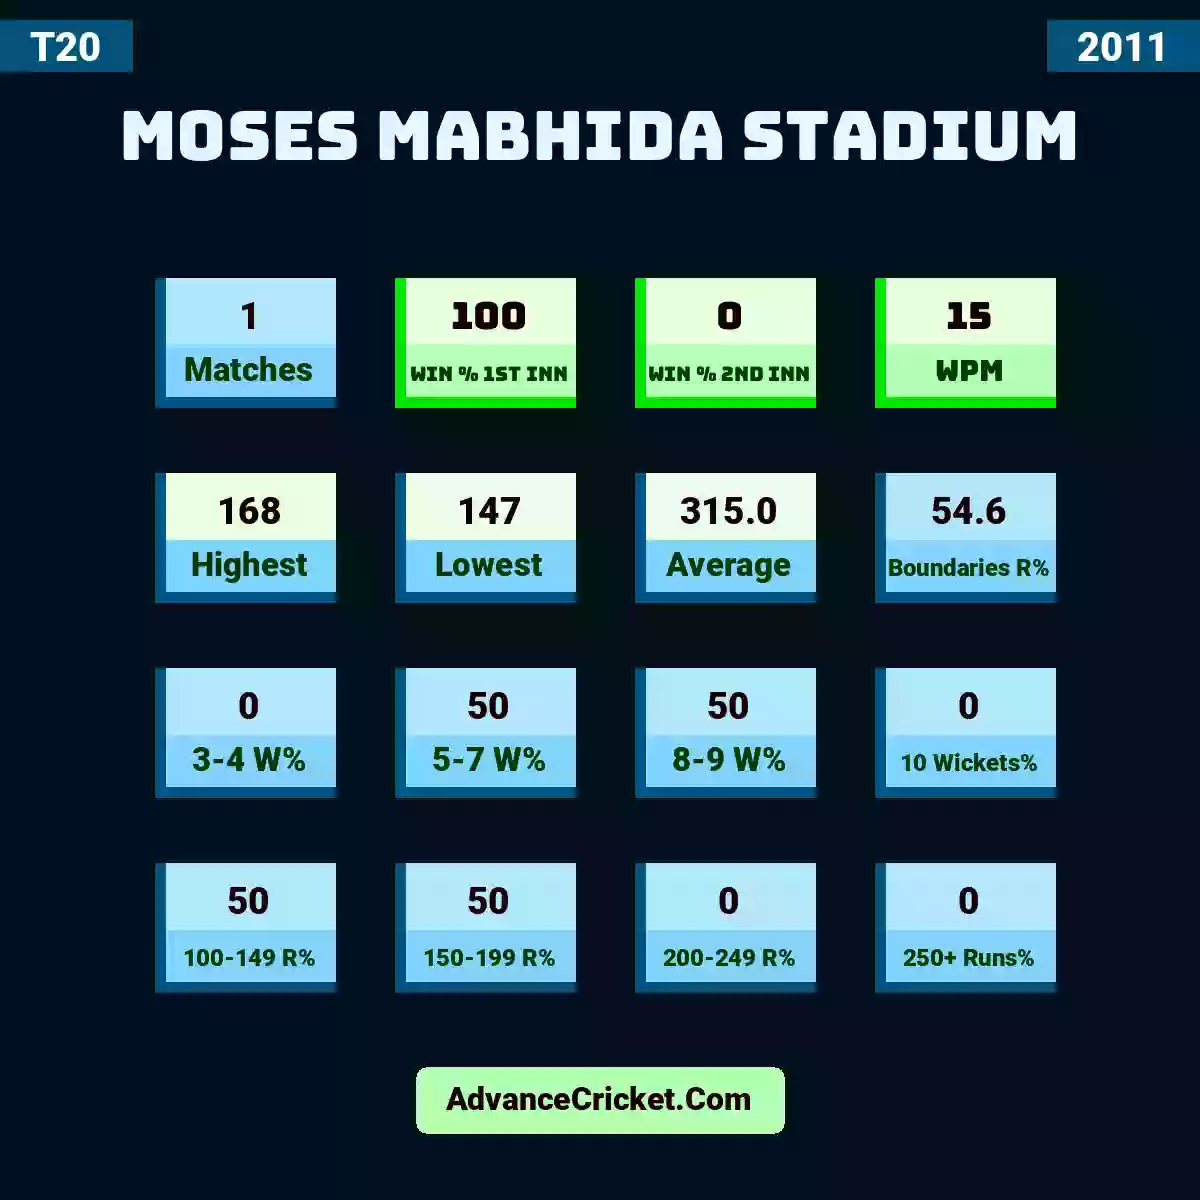 Image showing Moses Mabhida Stadium with Matches: 1, Win % 1st Inn: 100, Win % 2nd Inn: 0, WPM: 15, Highest: 168, Lowest: 147, Average: 315.0, Boundaries R%: 54.6, 3-4 W%: 0, 5-7 W%: 50, 8-9 W%: 50, 10 Wickets%: 0, 100-149 R%: 50, 150-199 R%: 50, 200-249 R%: 0, 250+ Runs%: 0.